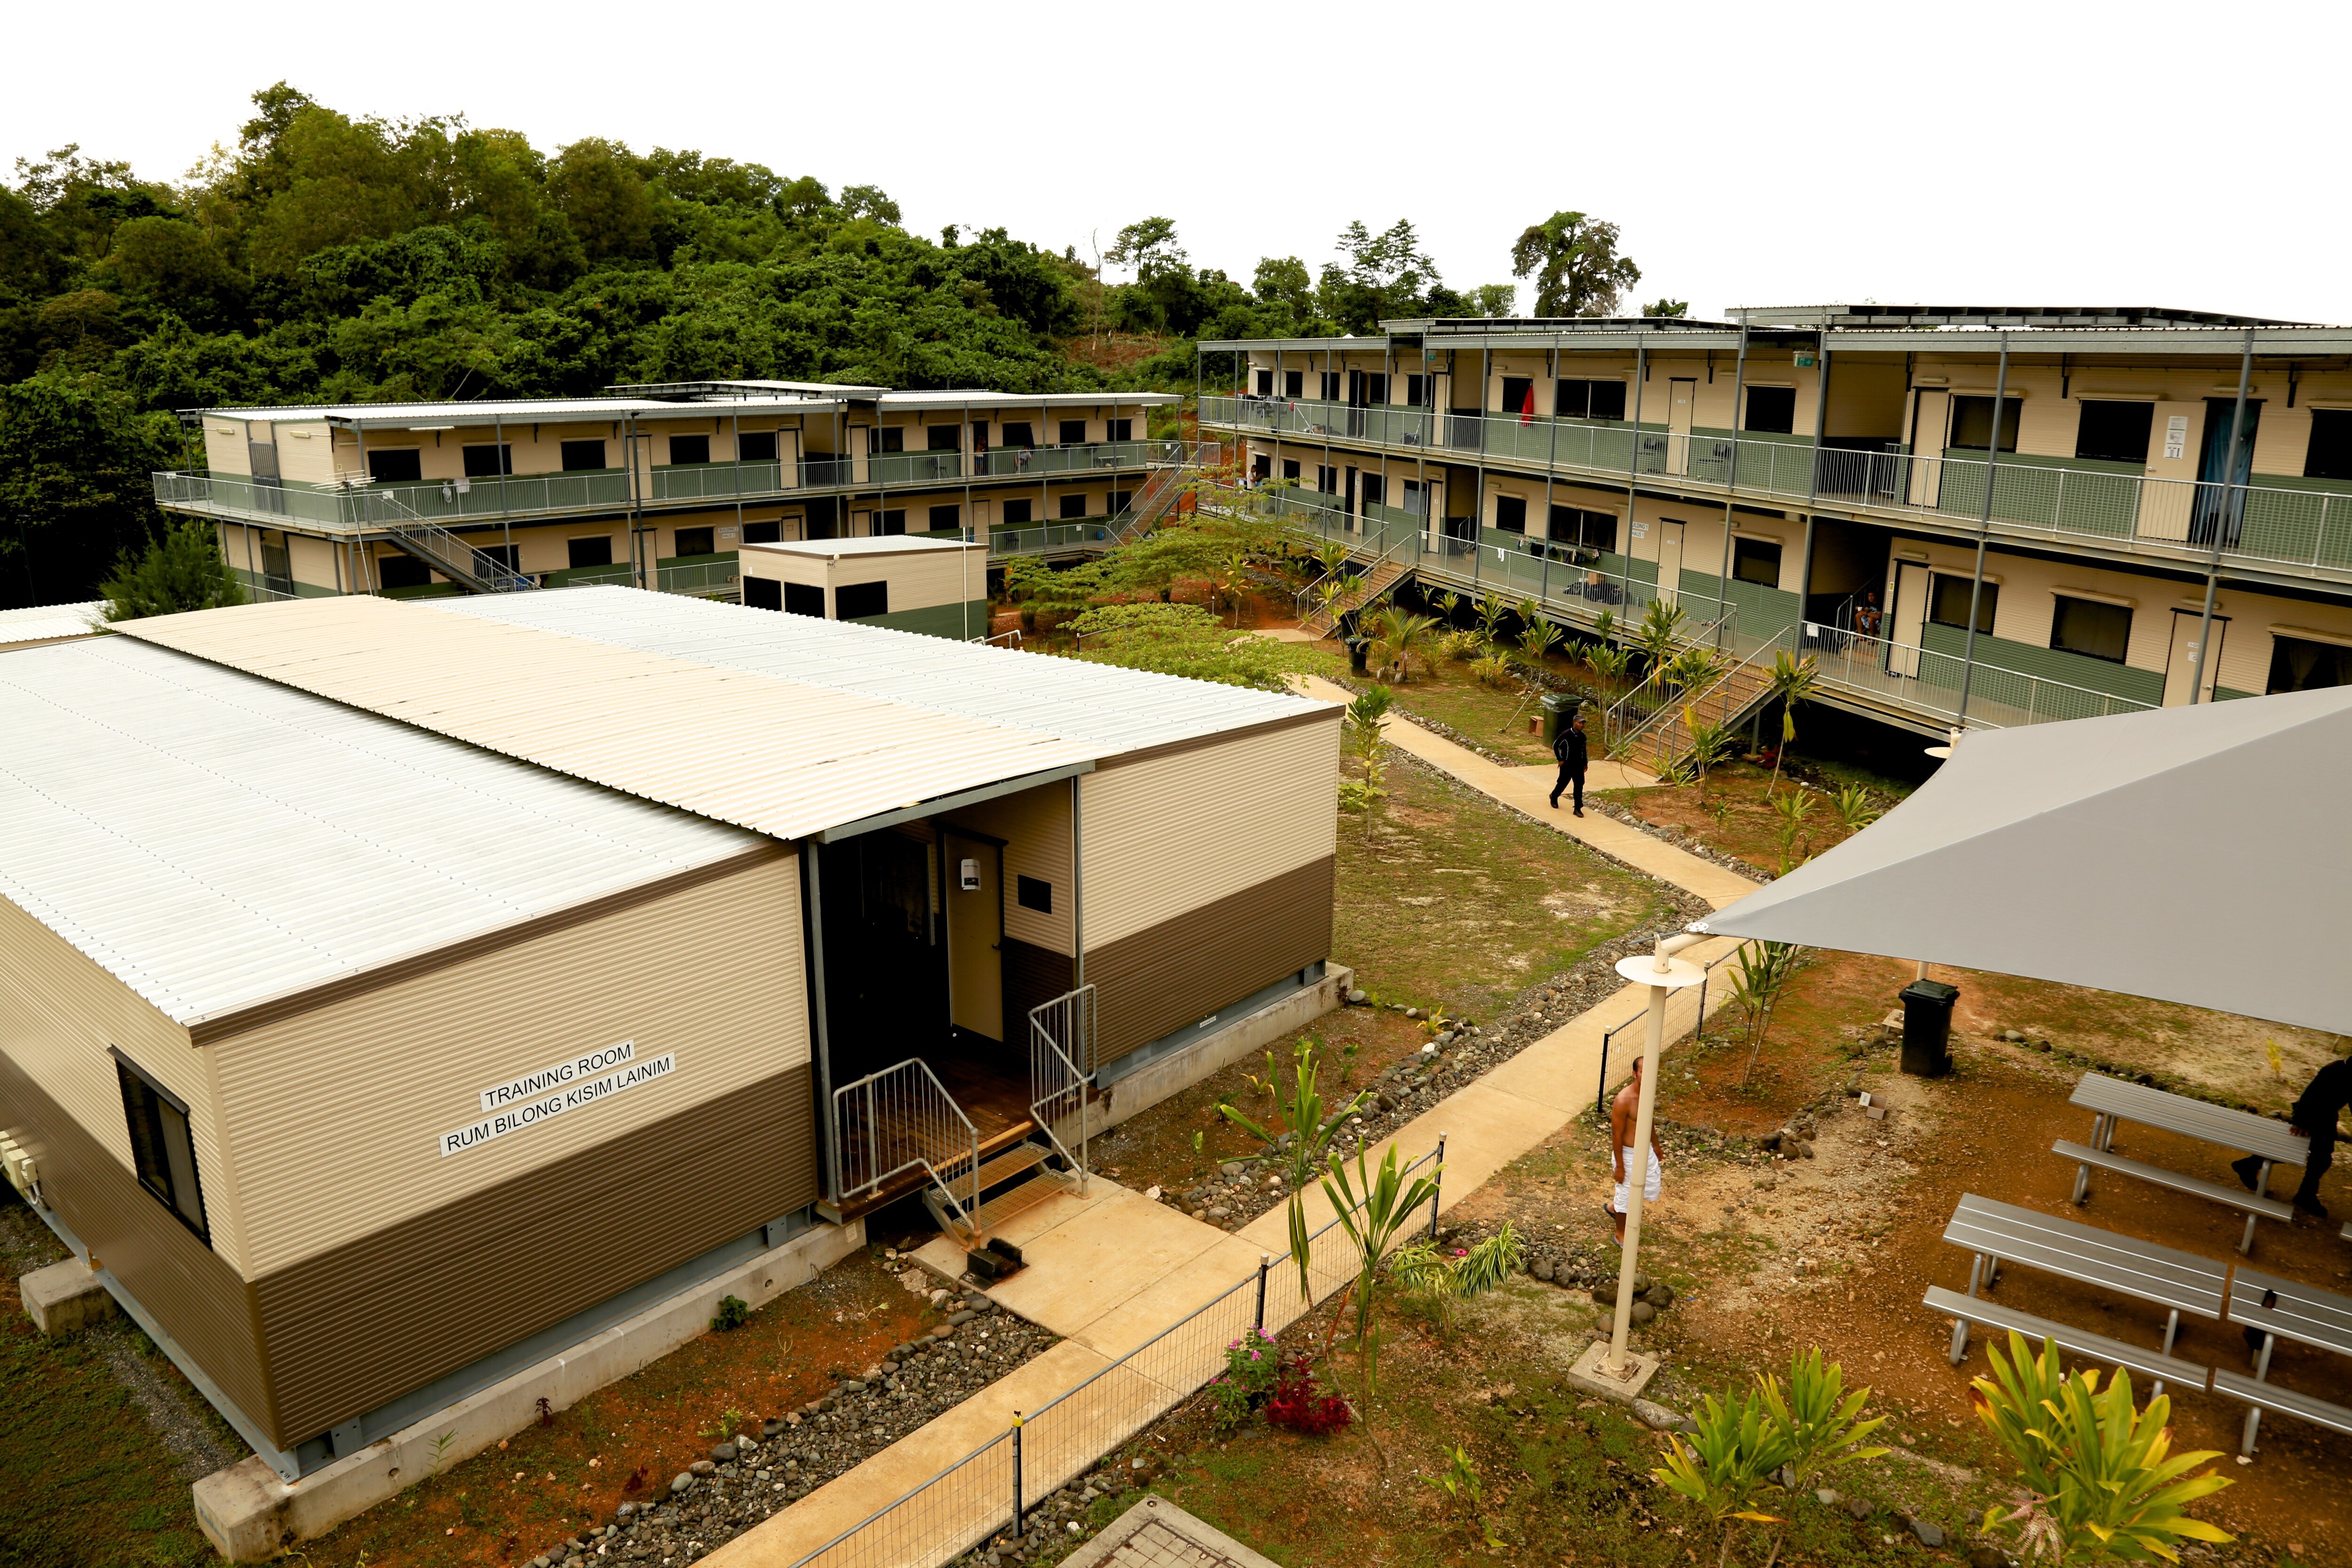 Picture of the immigration detention centre on Manus Island, Papua New Guinea. It closed in 2017.